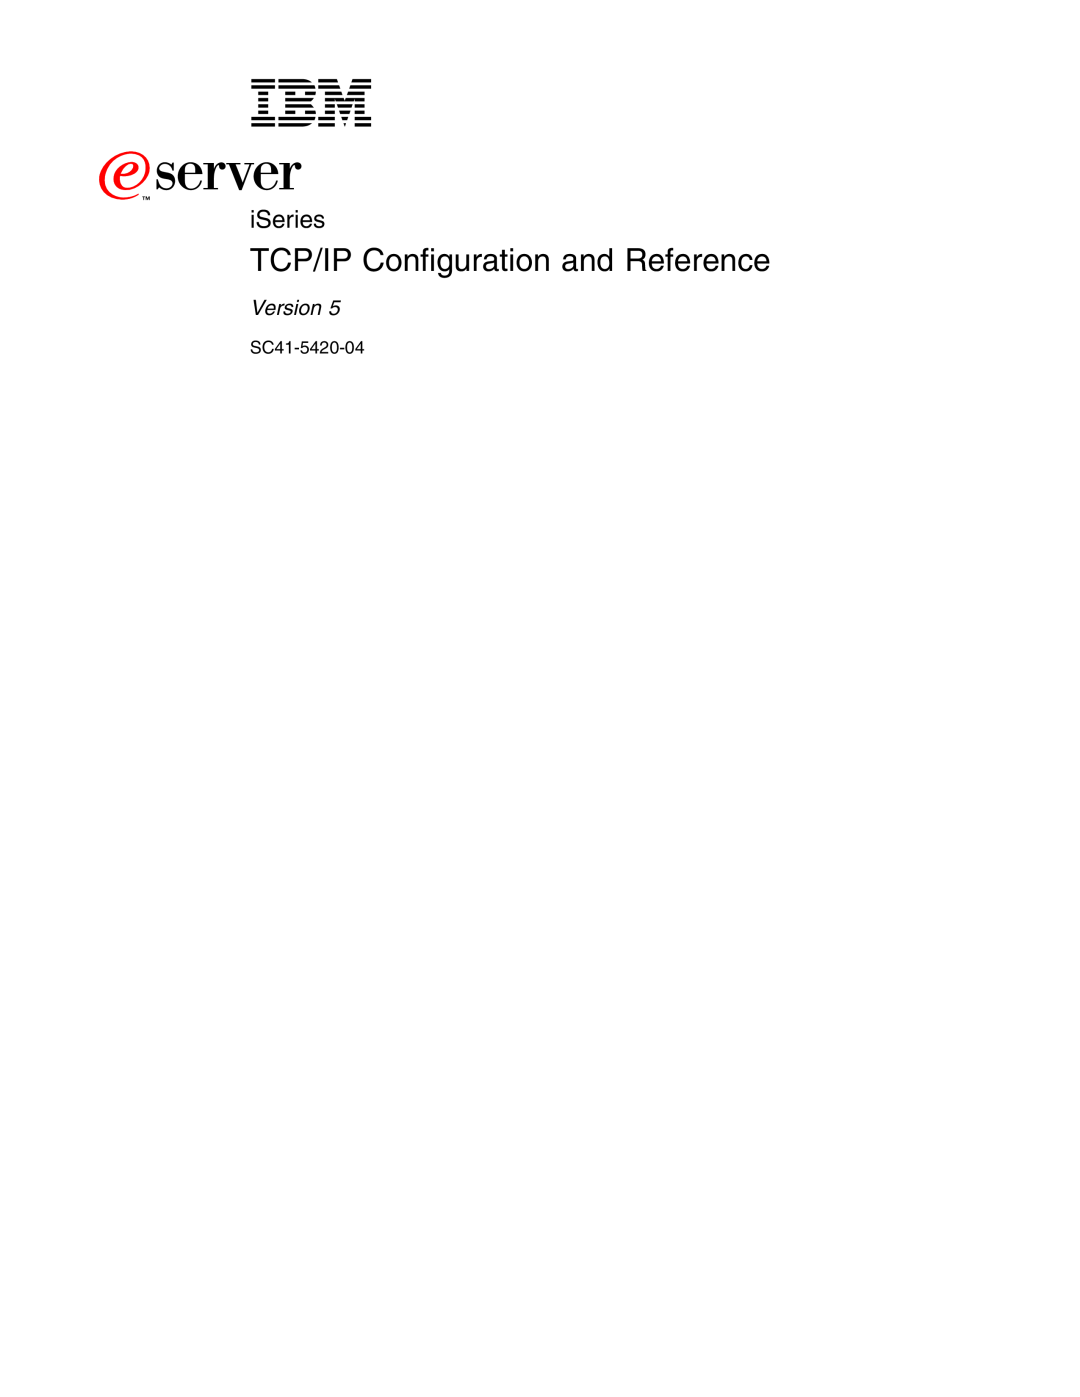 IBM SC41-5420-04 manual TCP/IP Configuration and Reference, iSeries, Version 